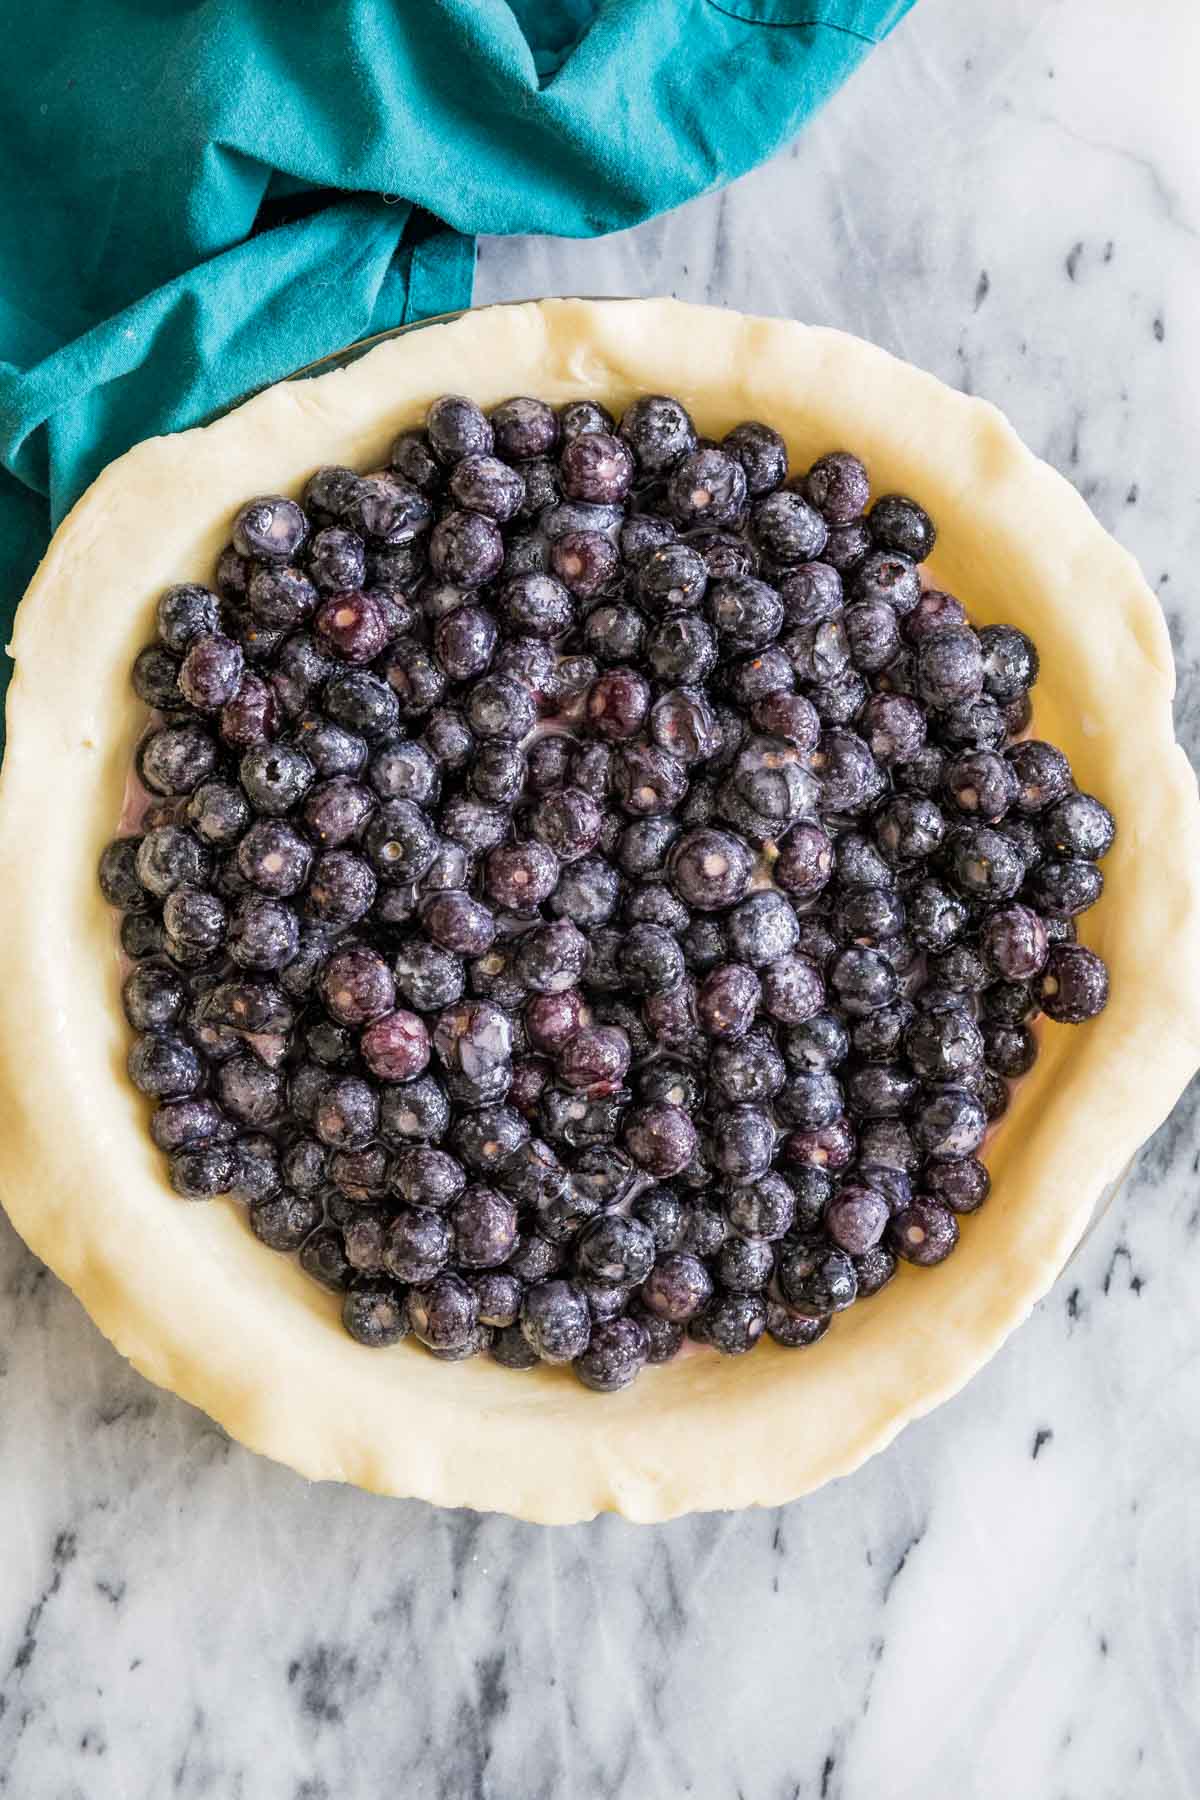 Overhead view of fresh blueberries in an unbaked pie shell.